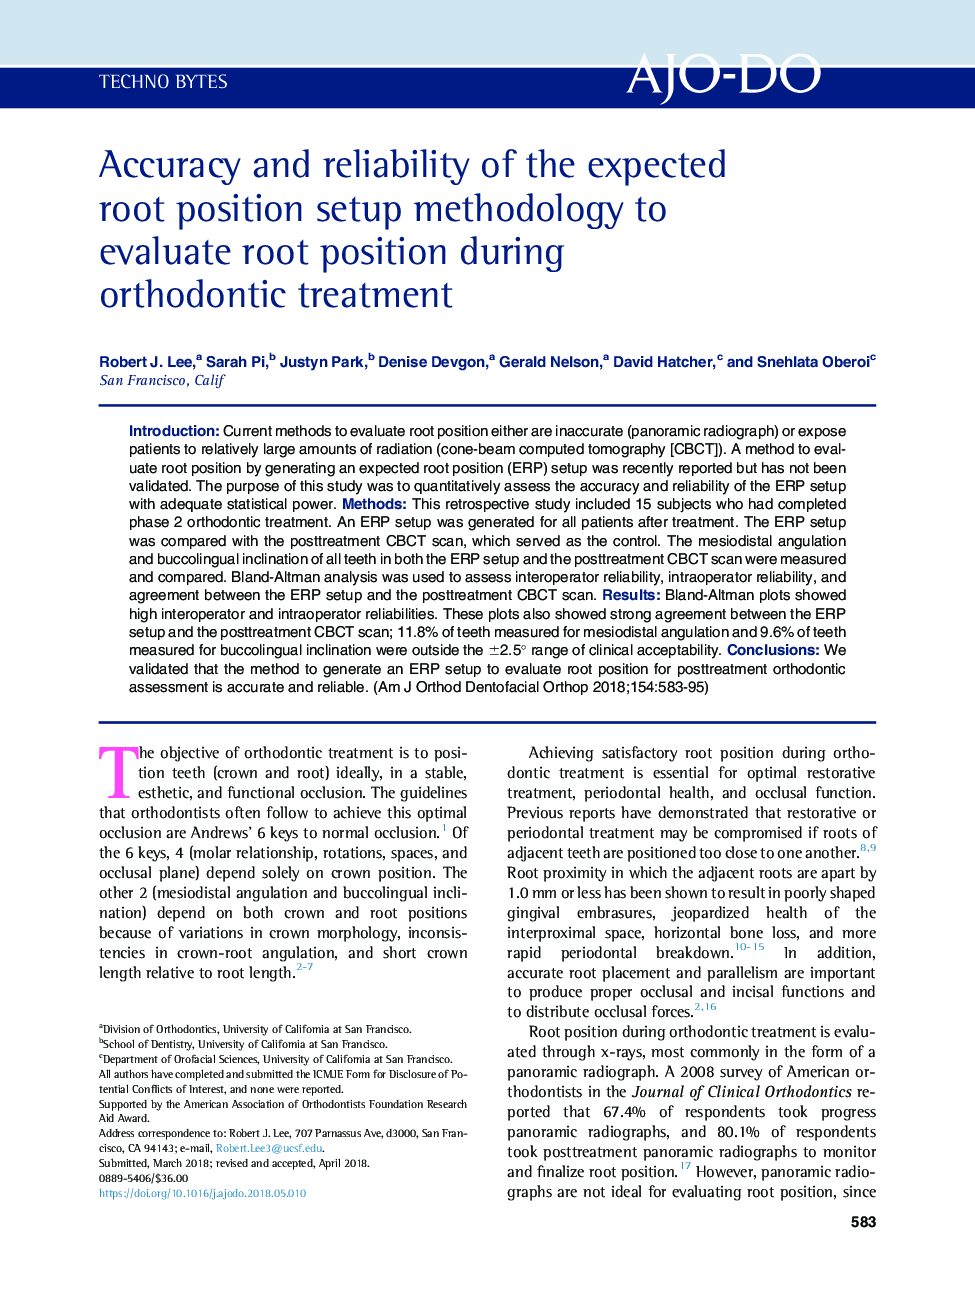 Accuracy and reliability of the expected root position setup methodology to evaluate root position during orthodontic treatment